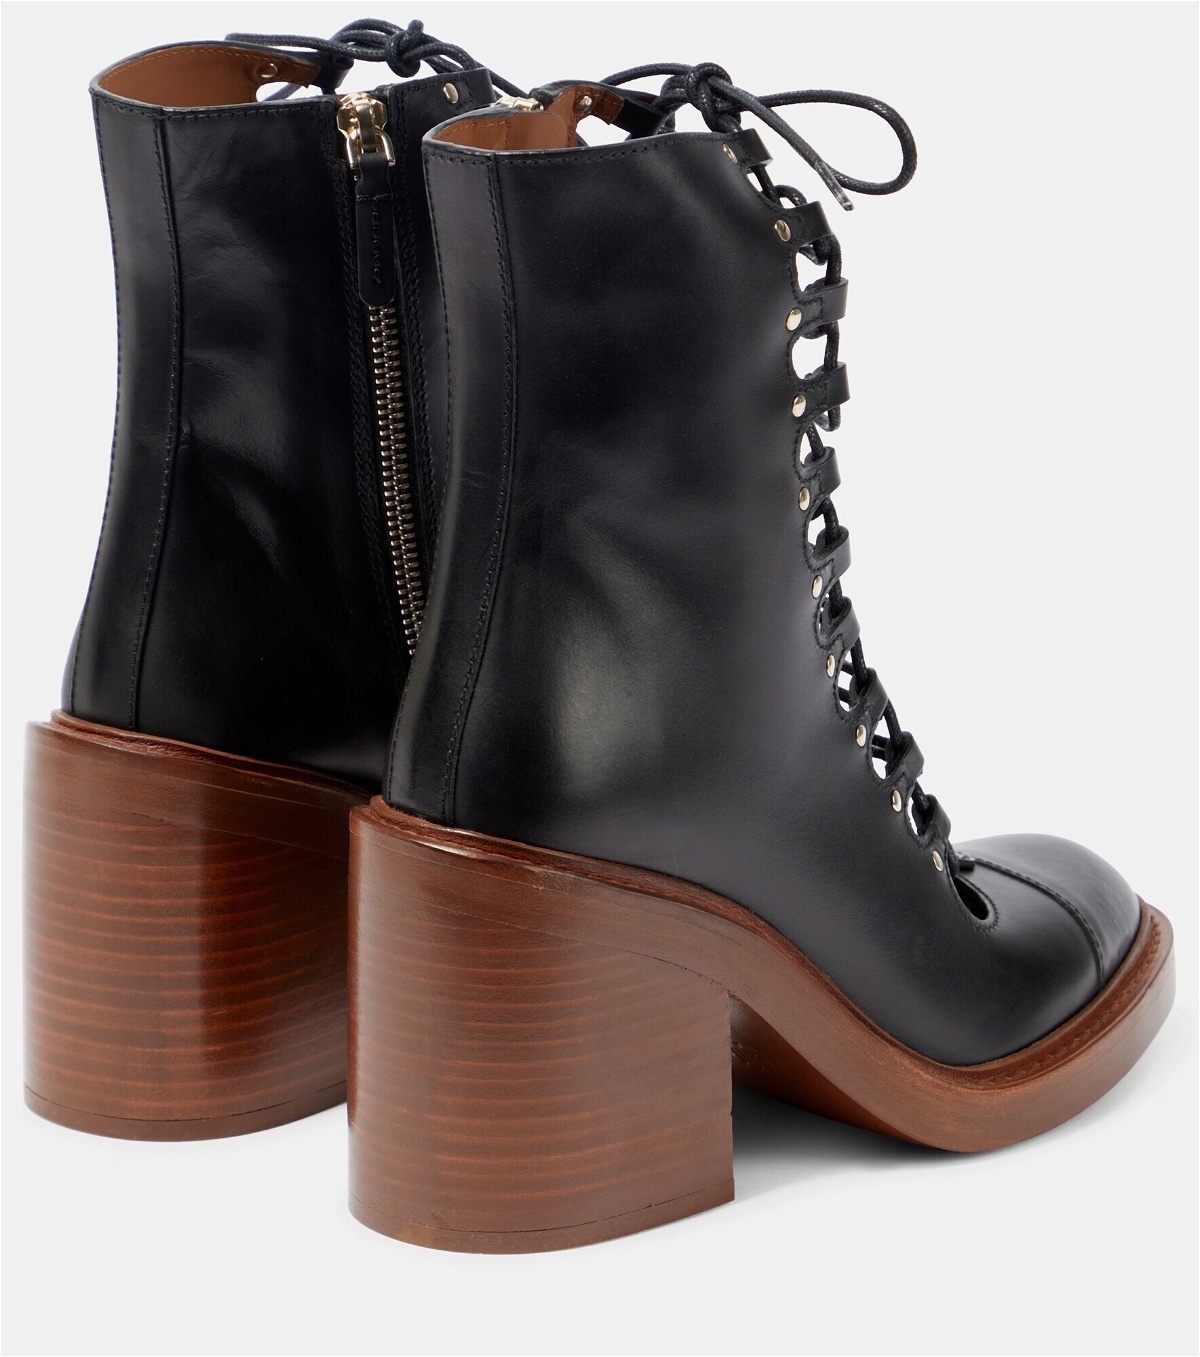 Chloe - Lace-up leather ankle boots Chloe